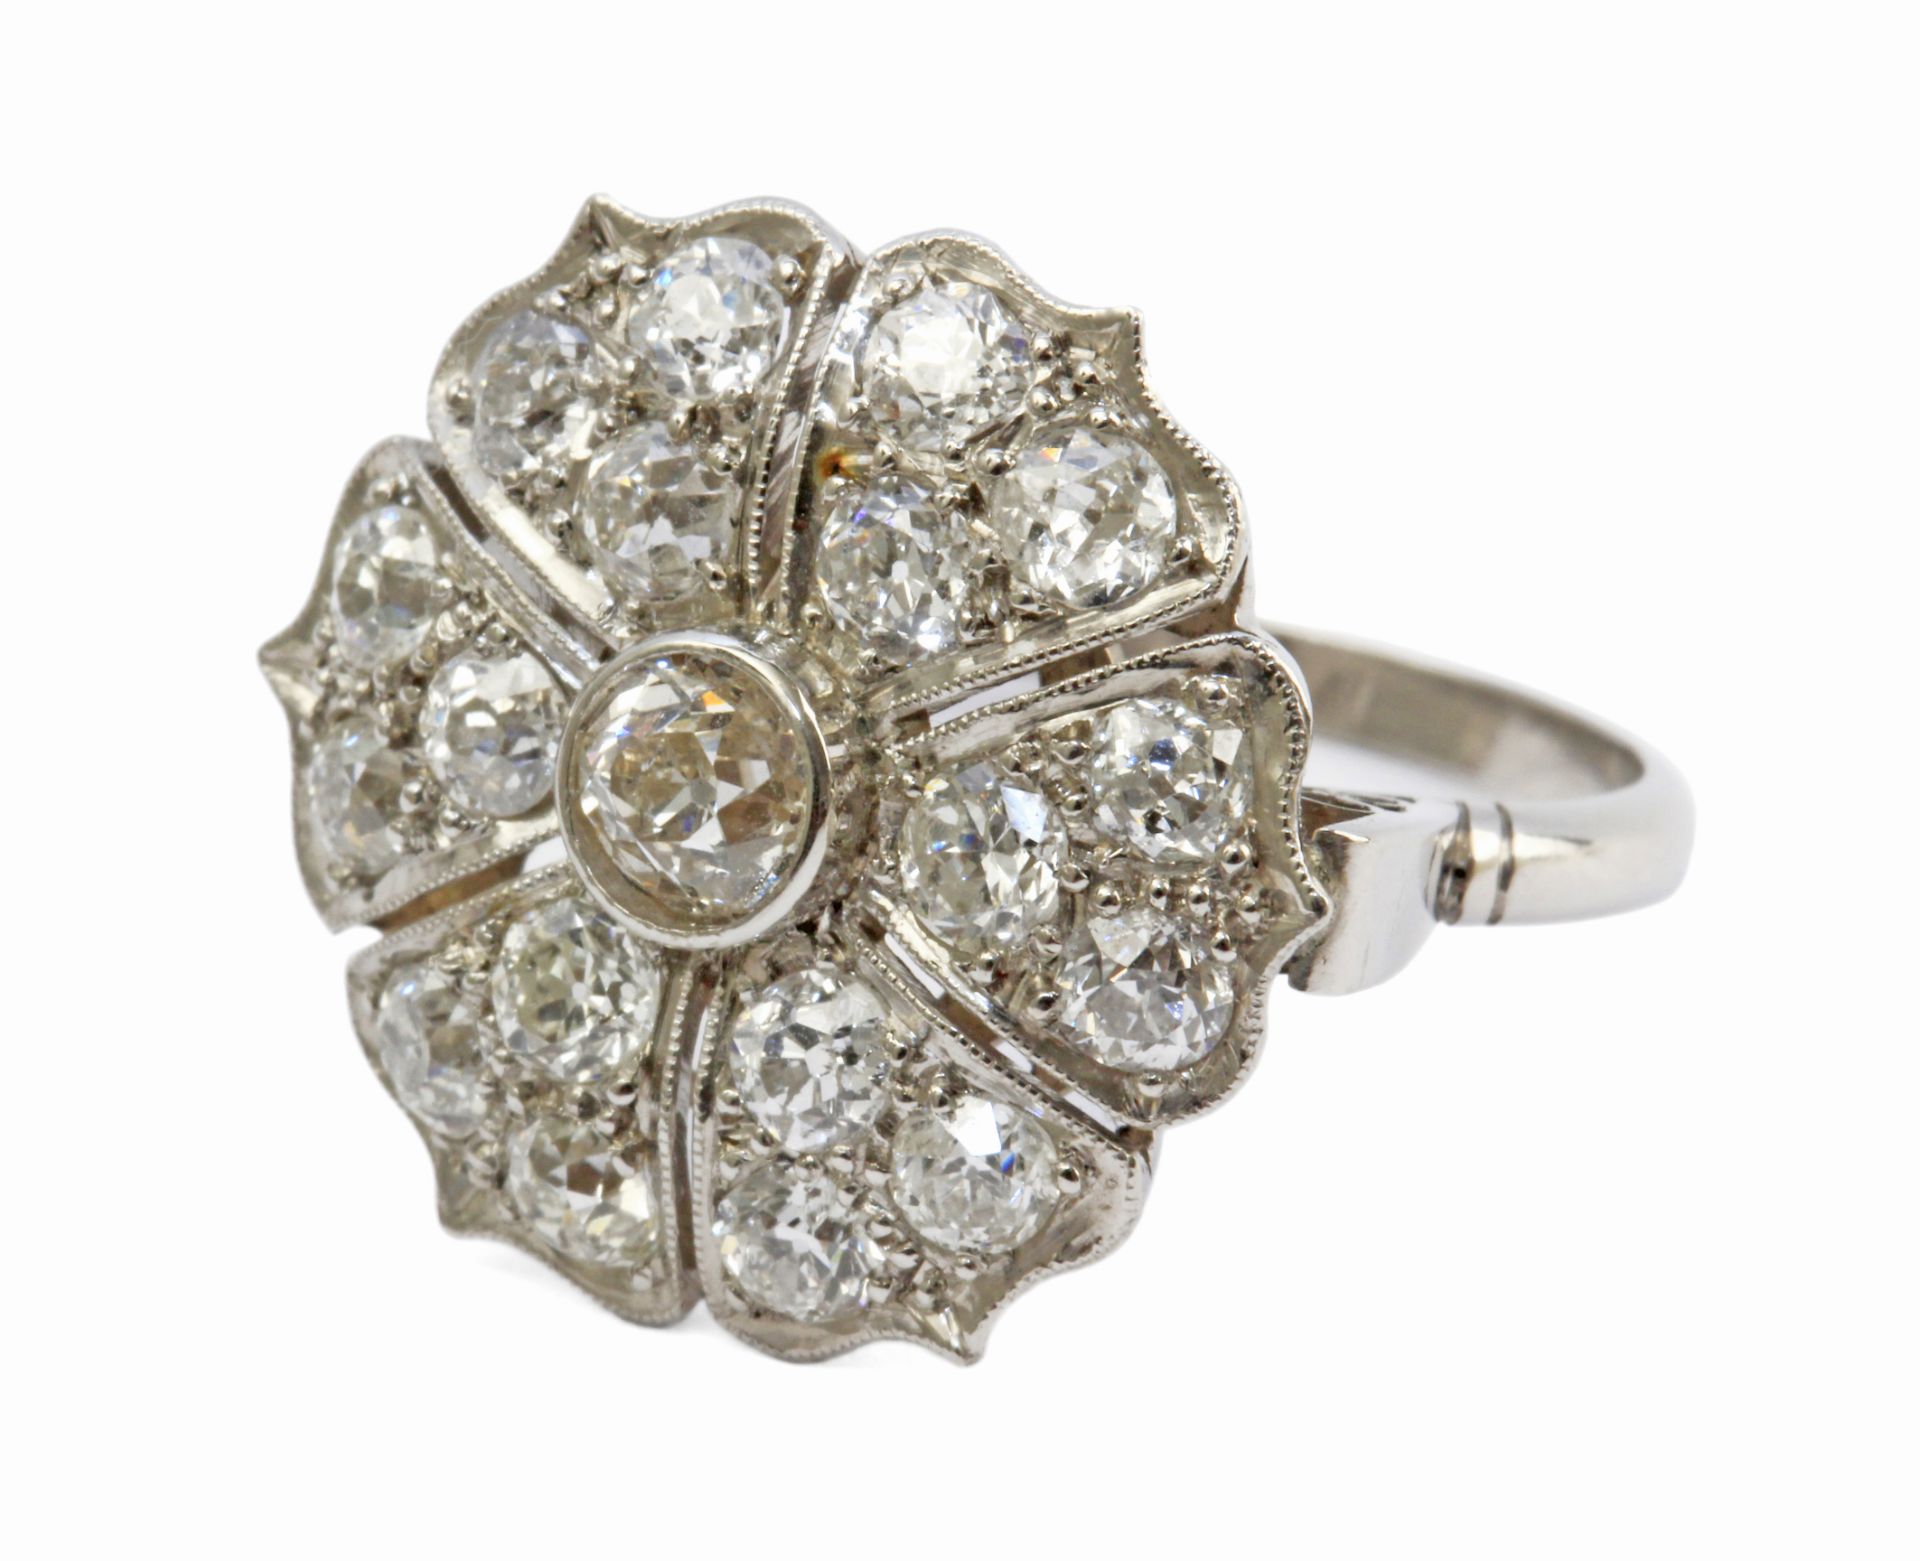 A 20th century Art-Déco style diamond flowery ring - Image 2 of 2